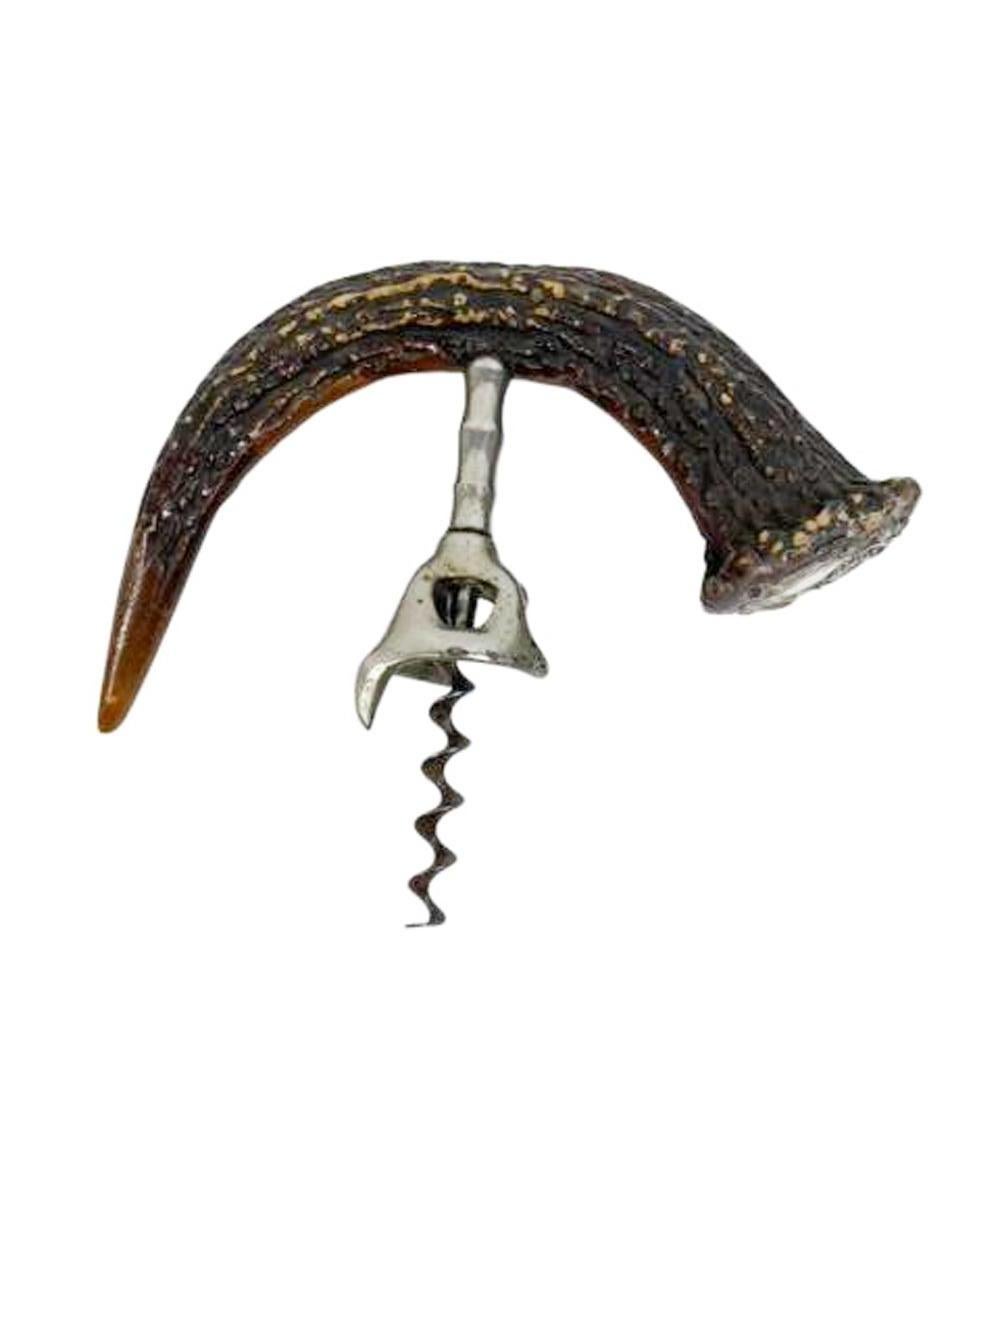 Victorian Stag Horn Corkscrew with a Large Curved Antler Handle In Good Condition For Sale In Nantucket, MA